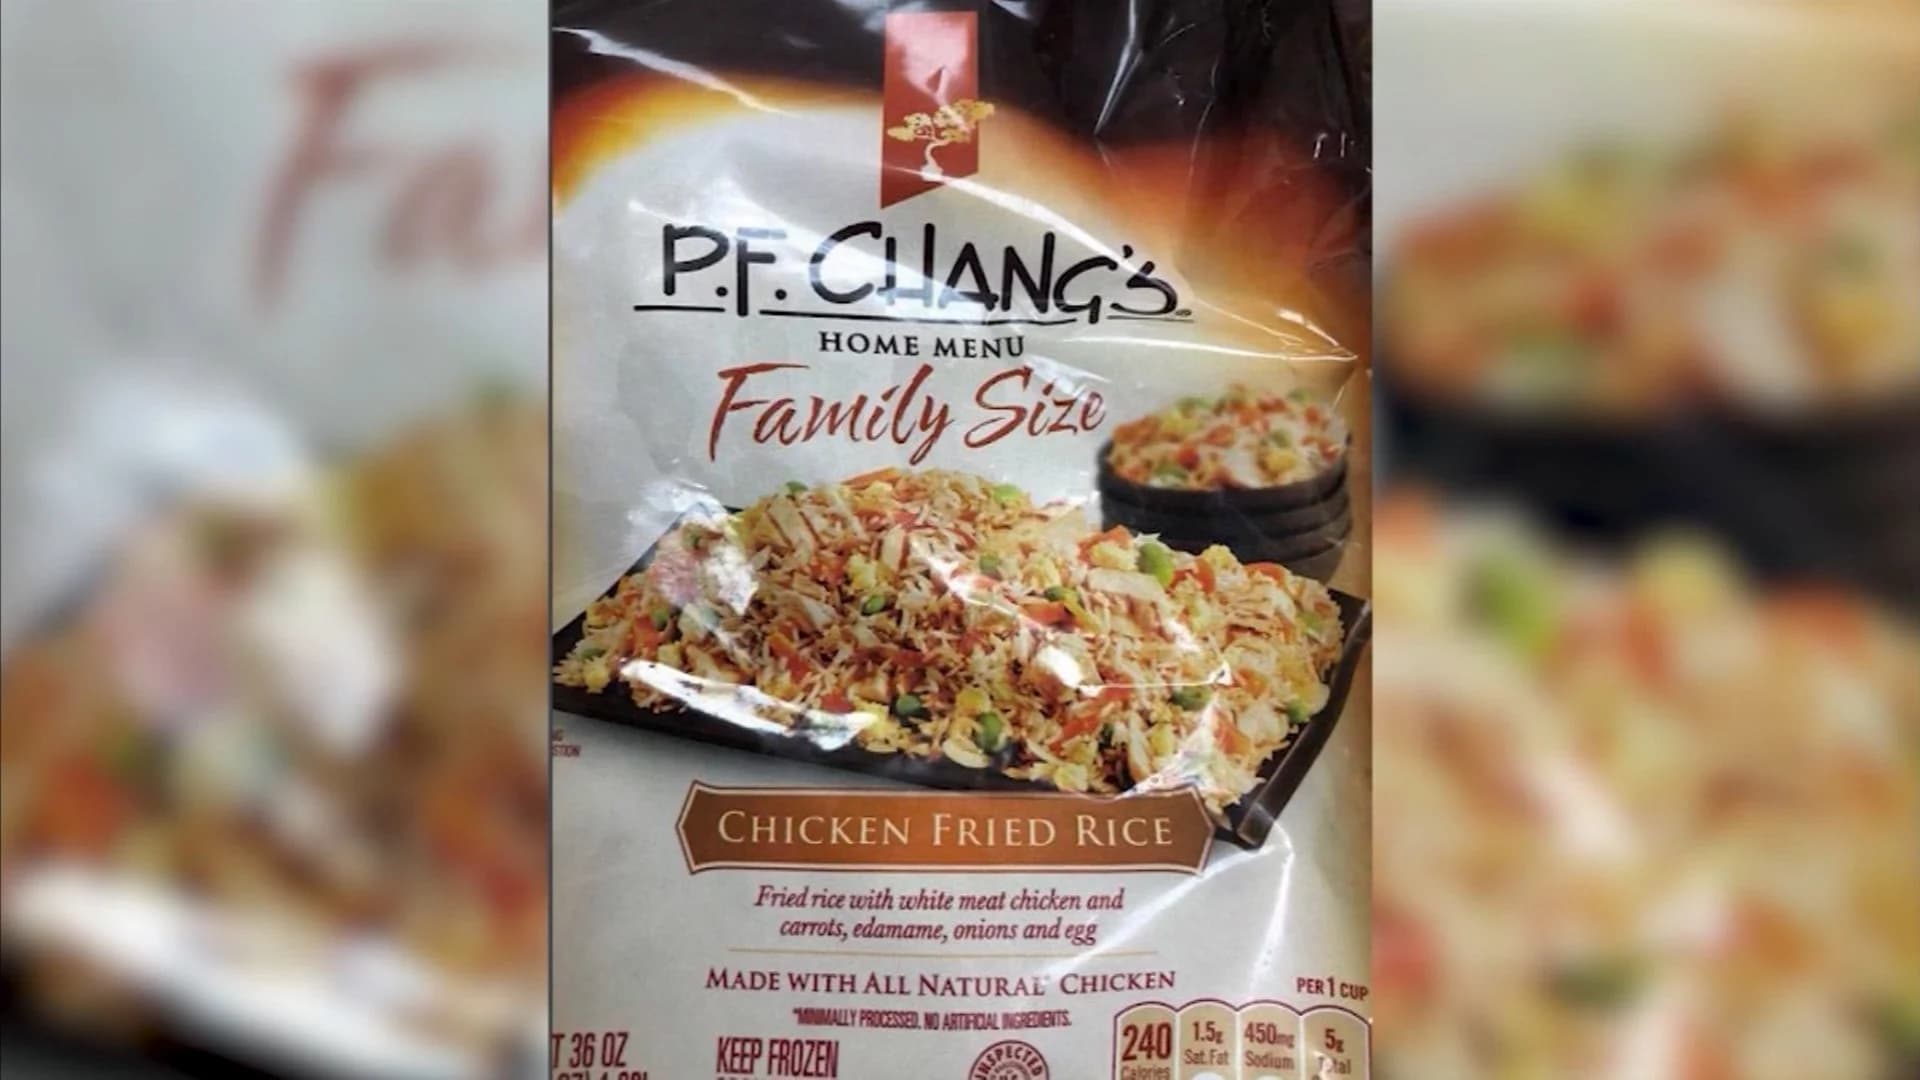 Company recalls over 2M pounds of PF Chang's frozen entrees